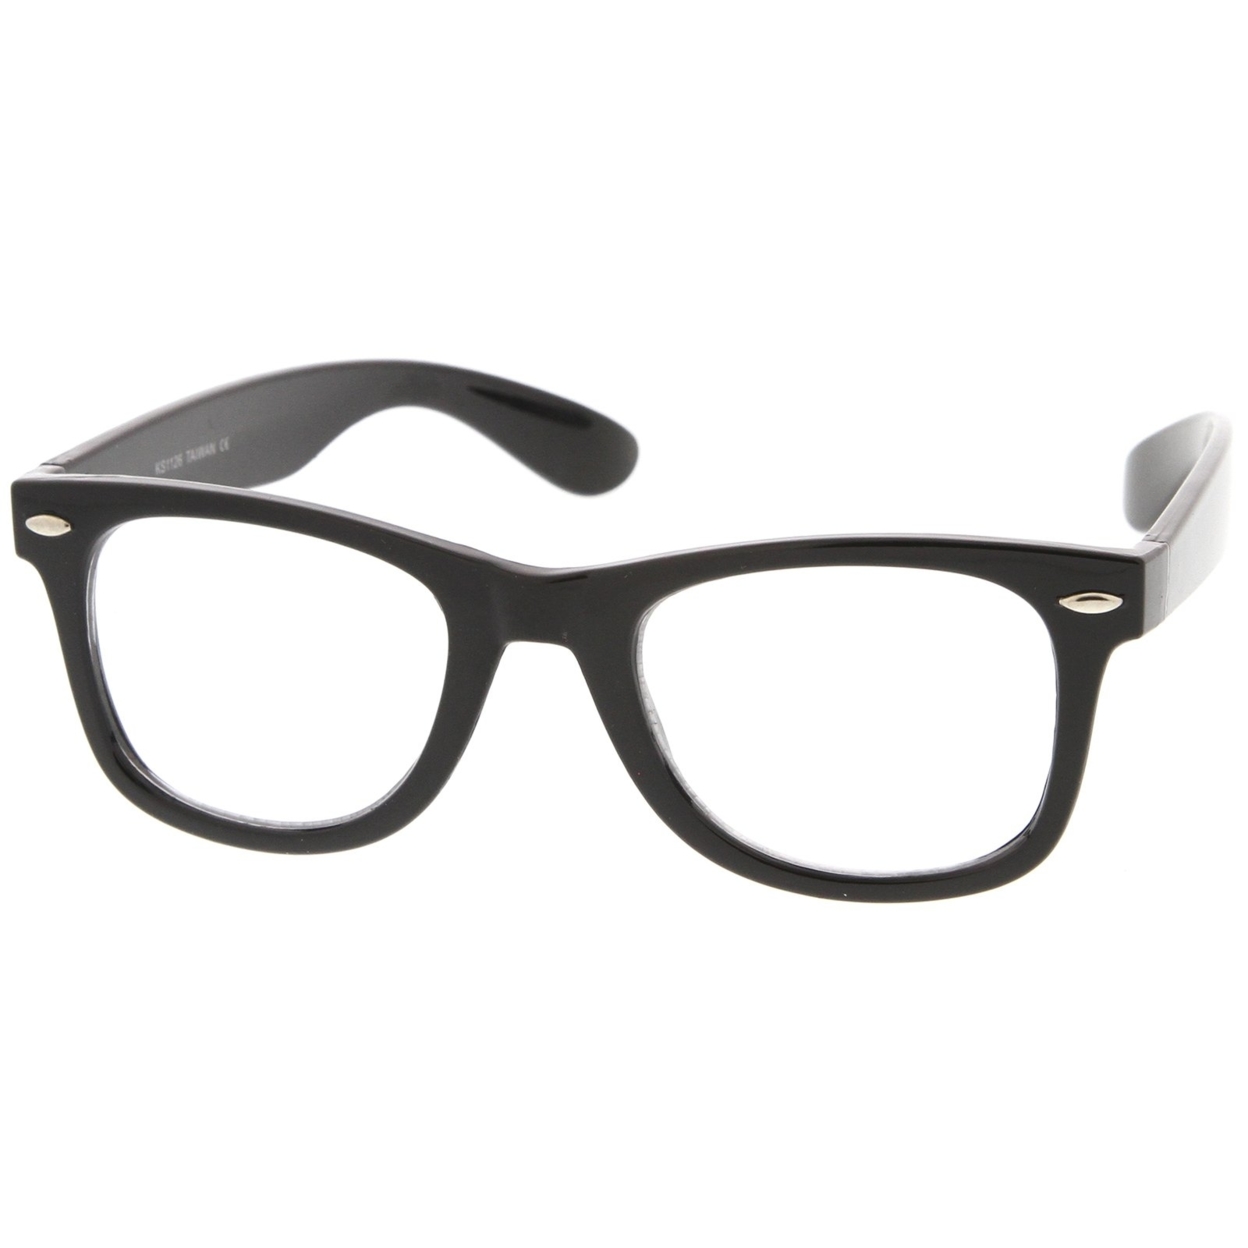 Classic Thick Square Clear Lens Horn Rimmed Eyeglasses 50mm - Black / Clear